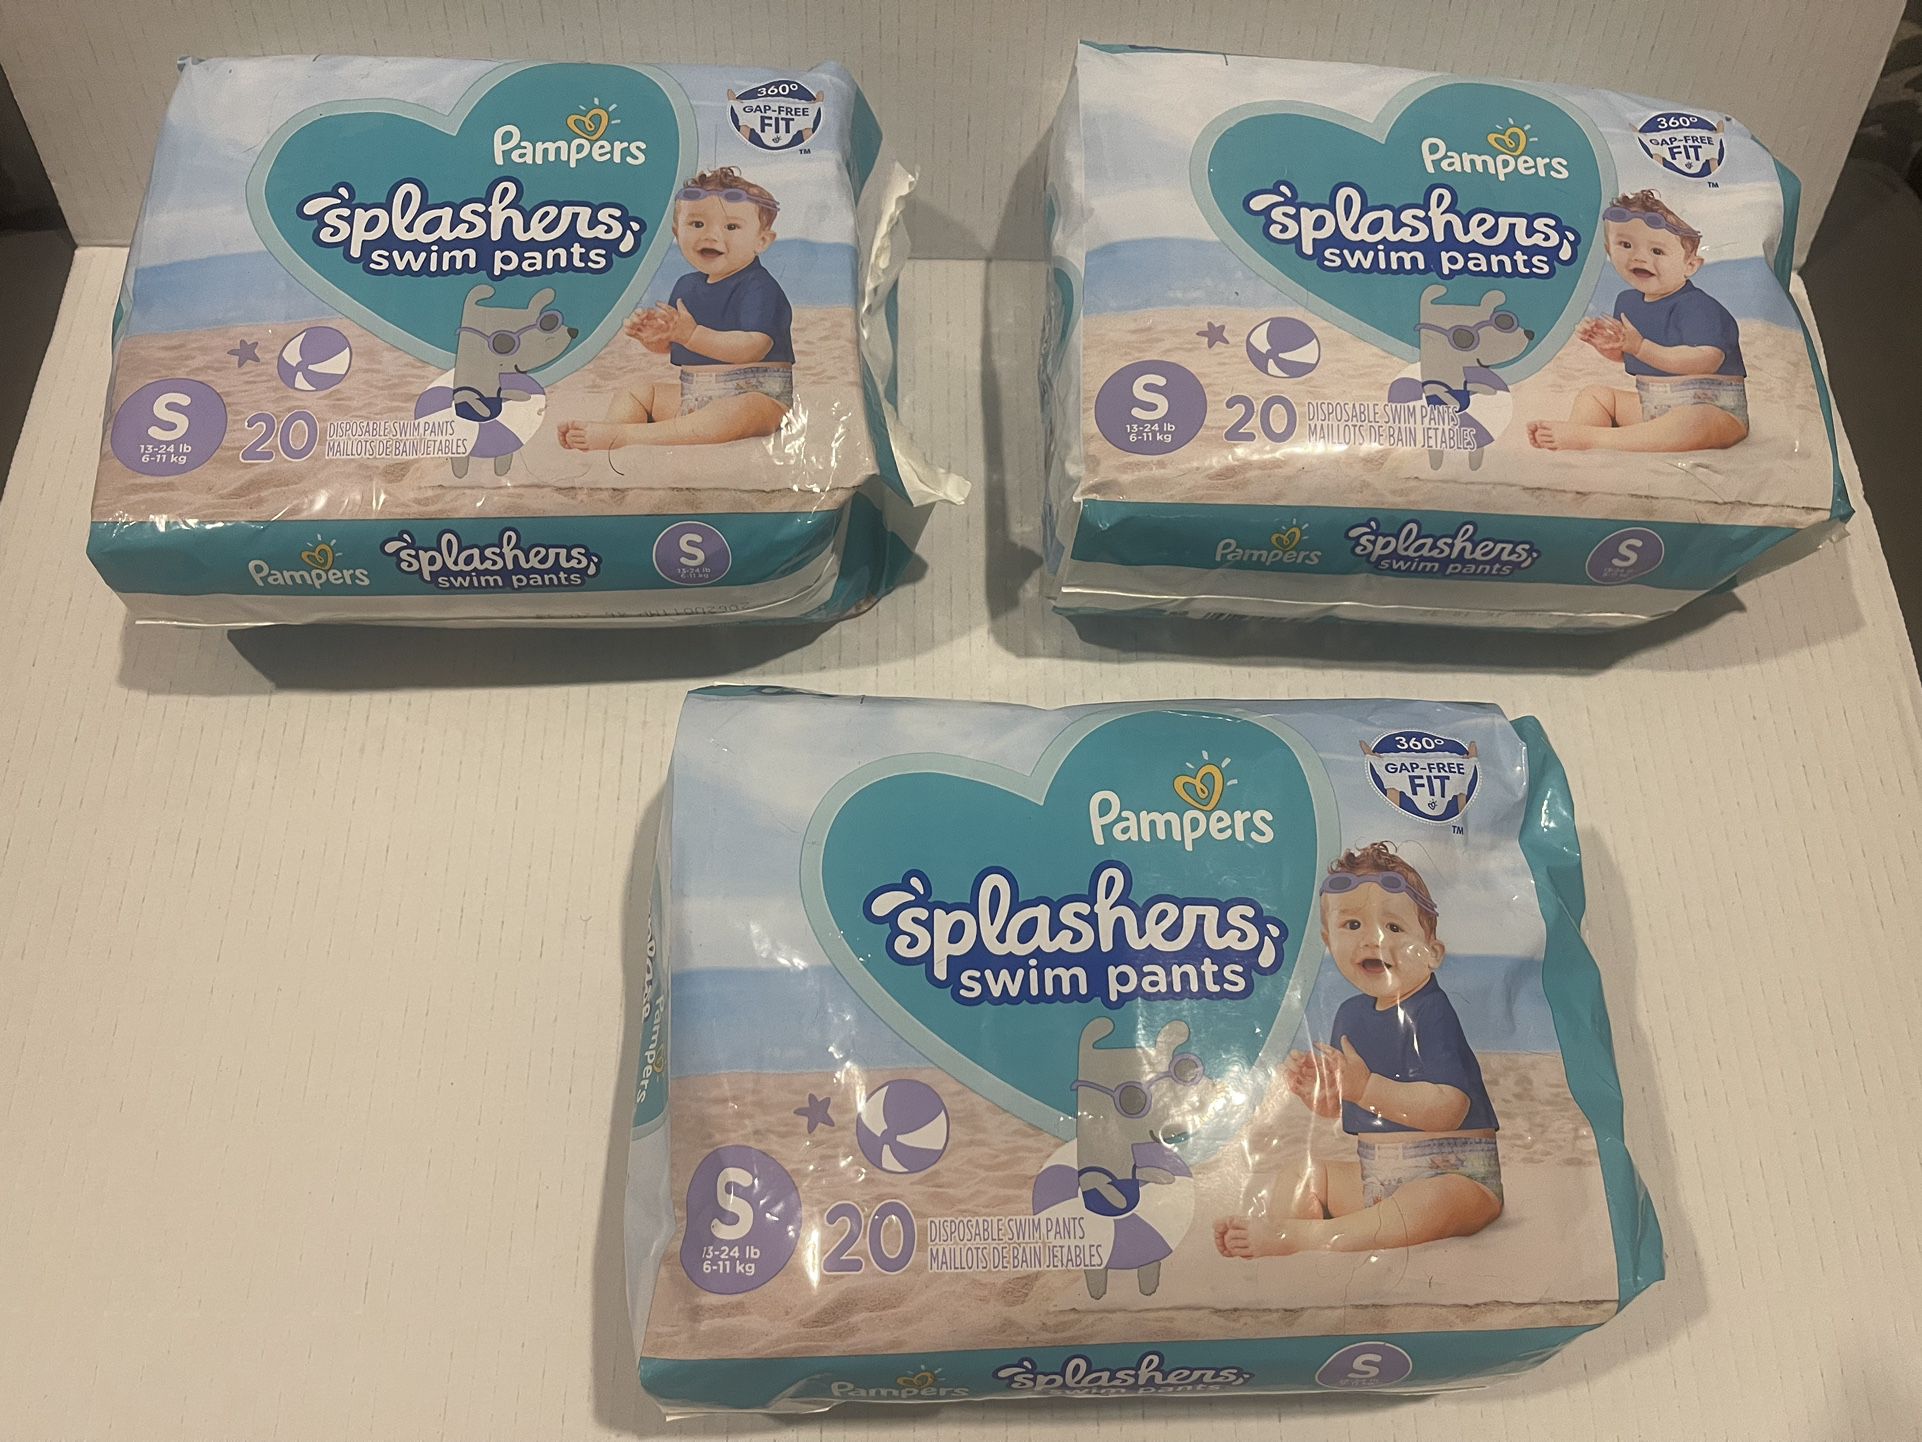 Pampers Spashers